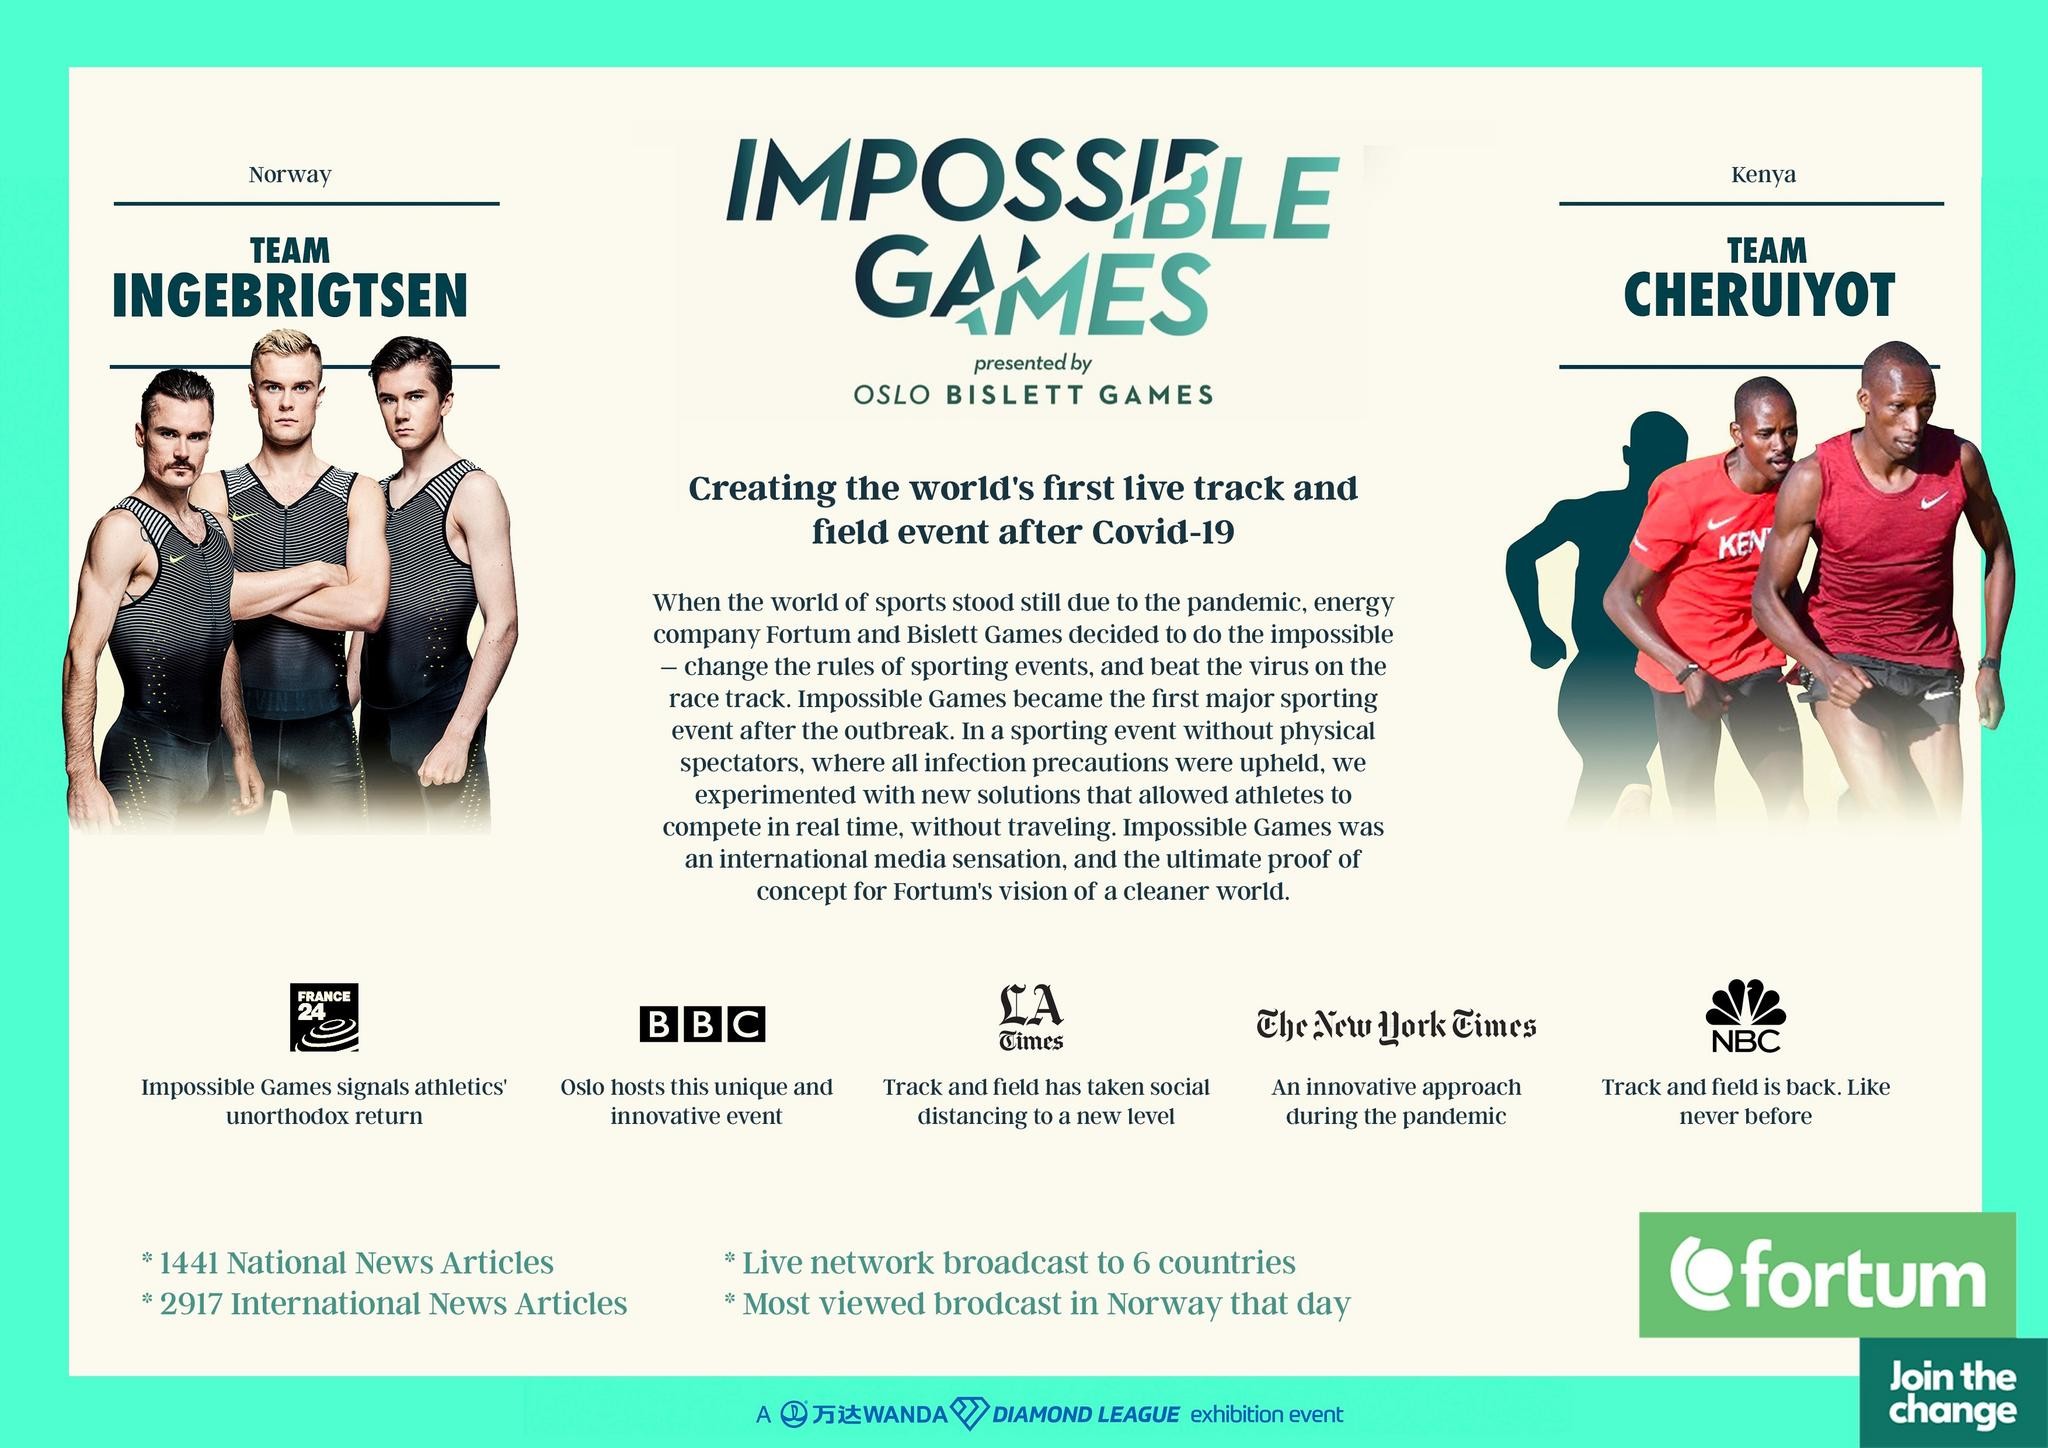 Impossible Games